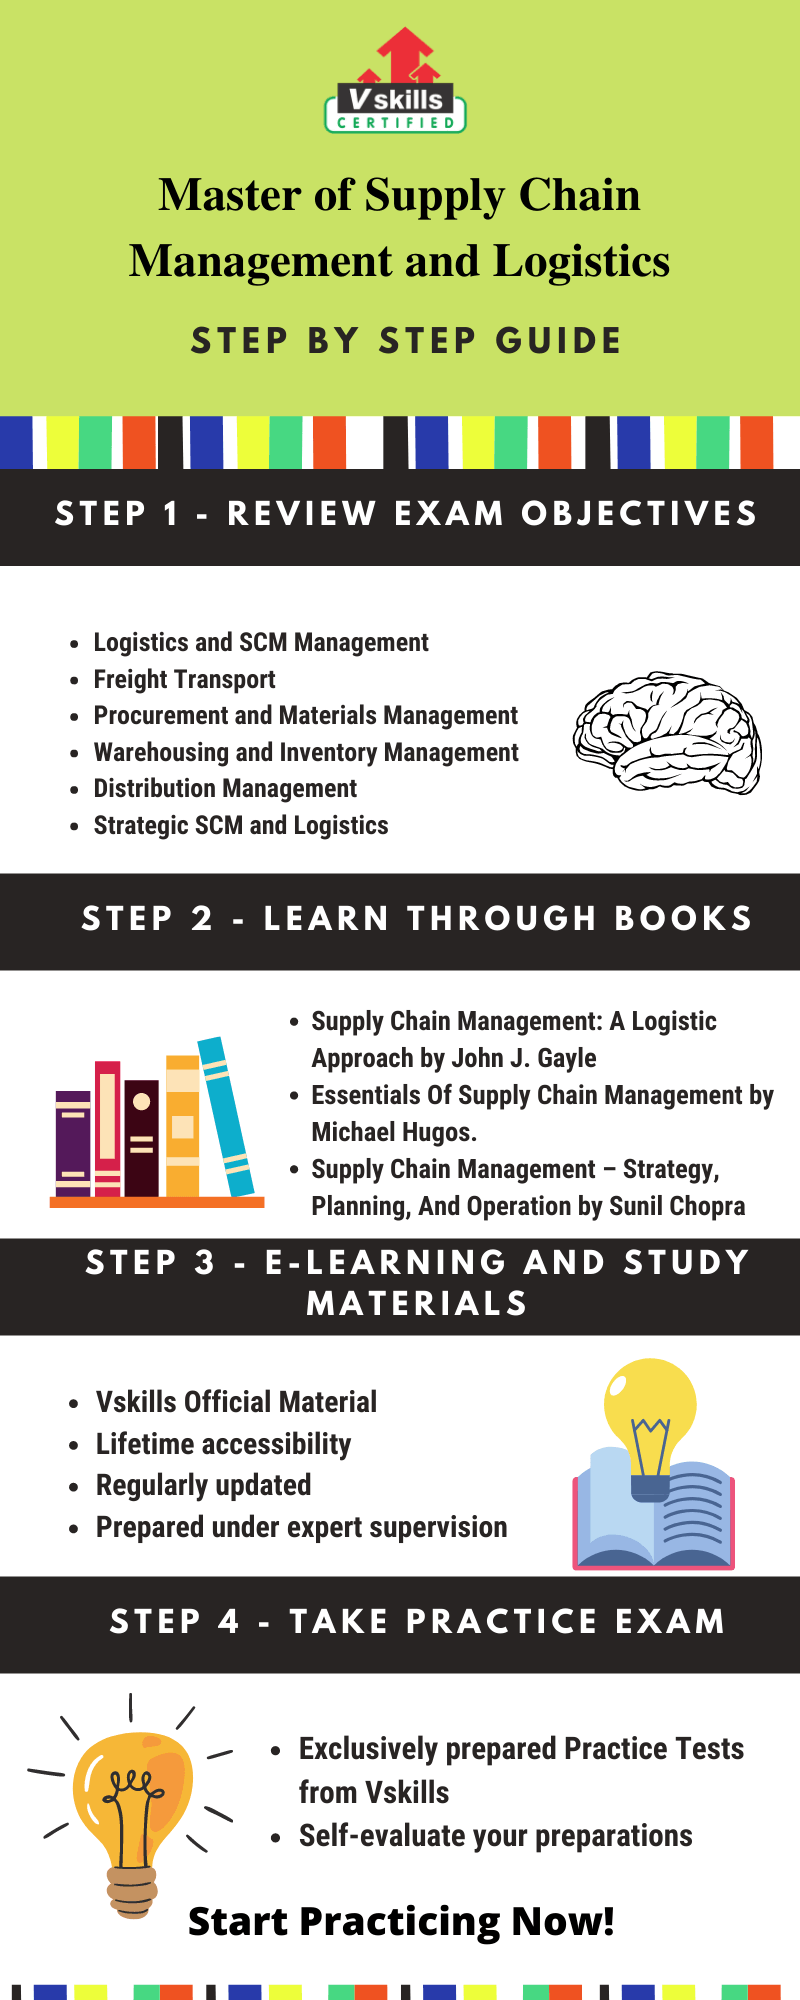 Master of Supply Chain Management and Logistics Preparation Guide